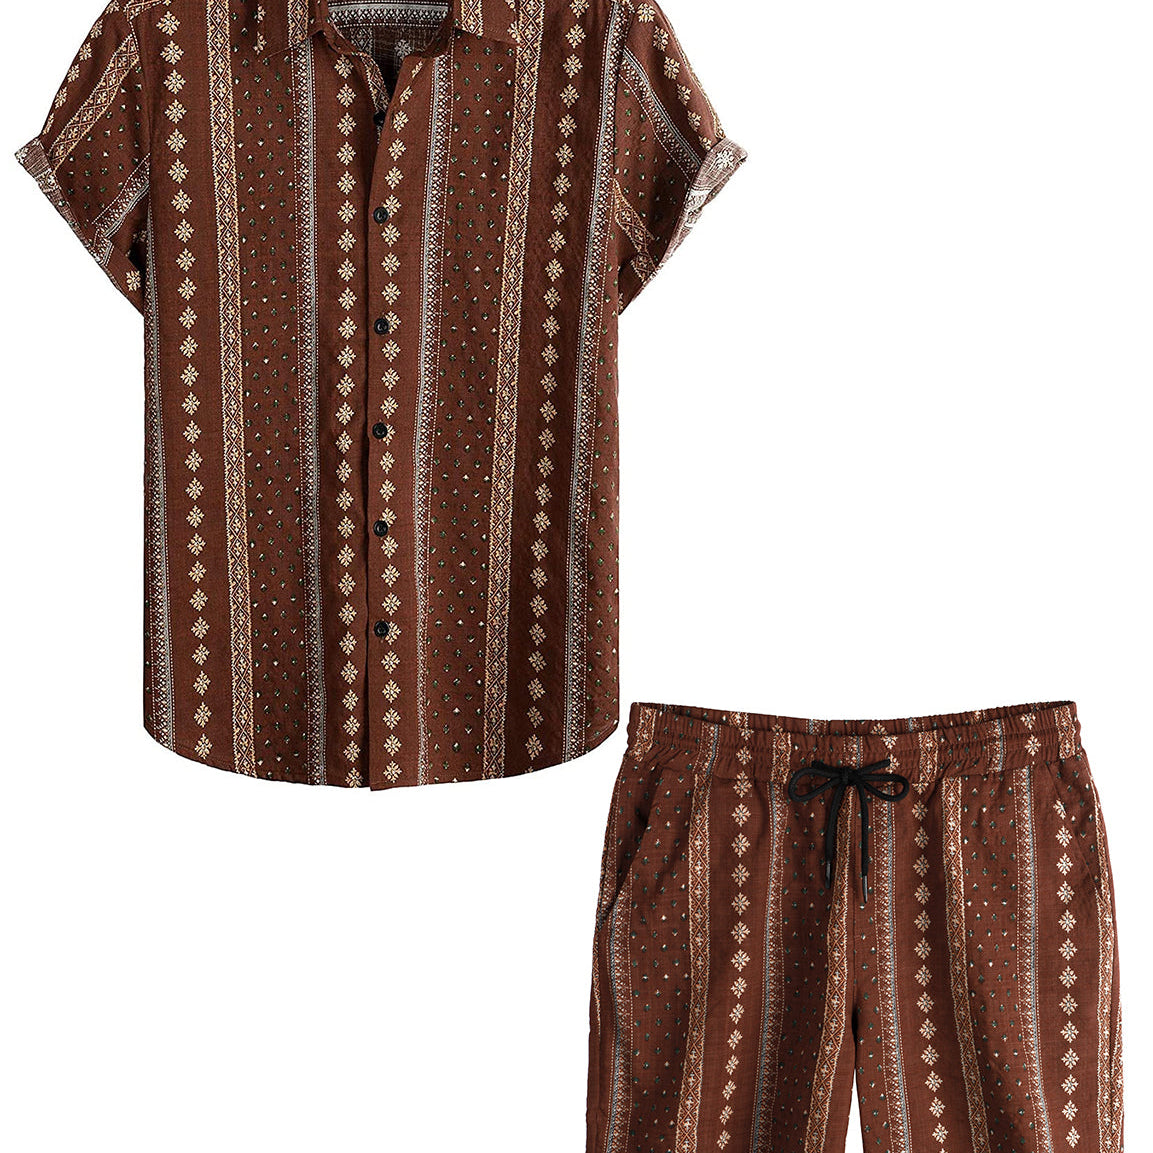 Men's Vintage Casual Button Up Matching Shirt and Shorts Set